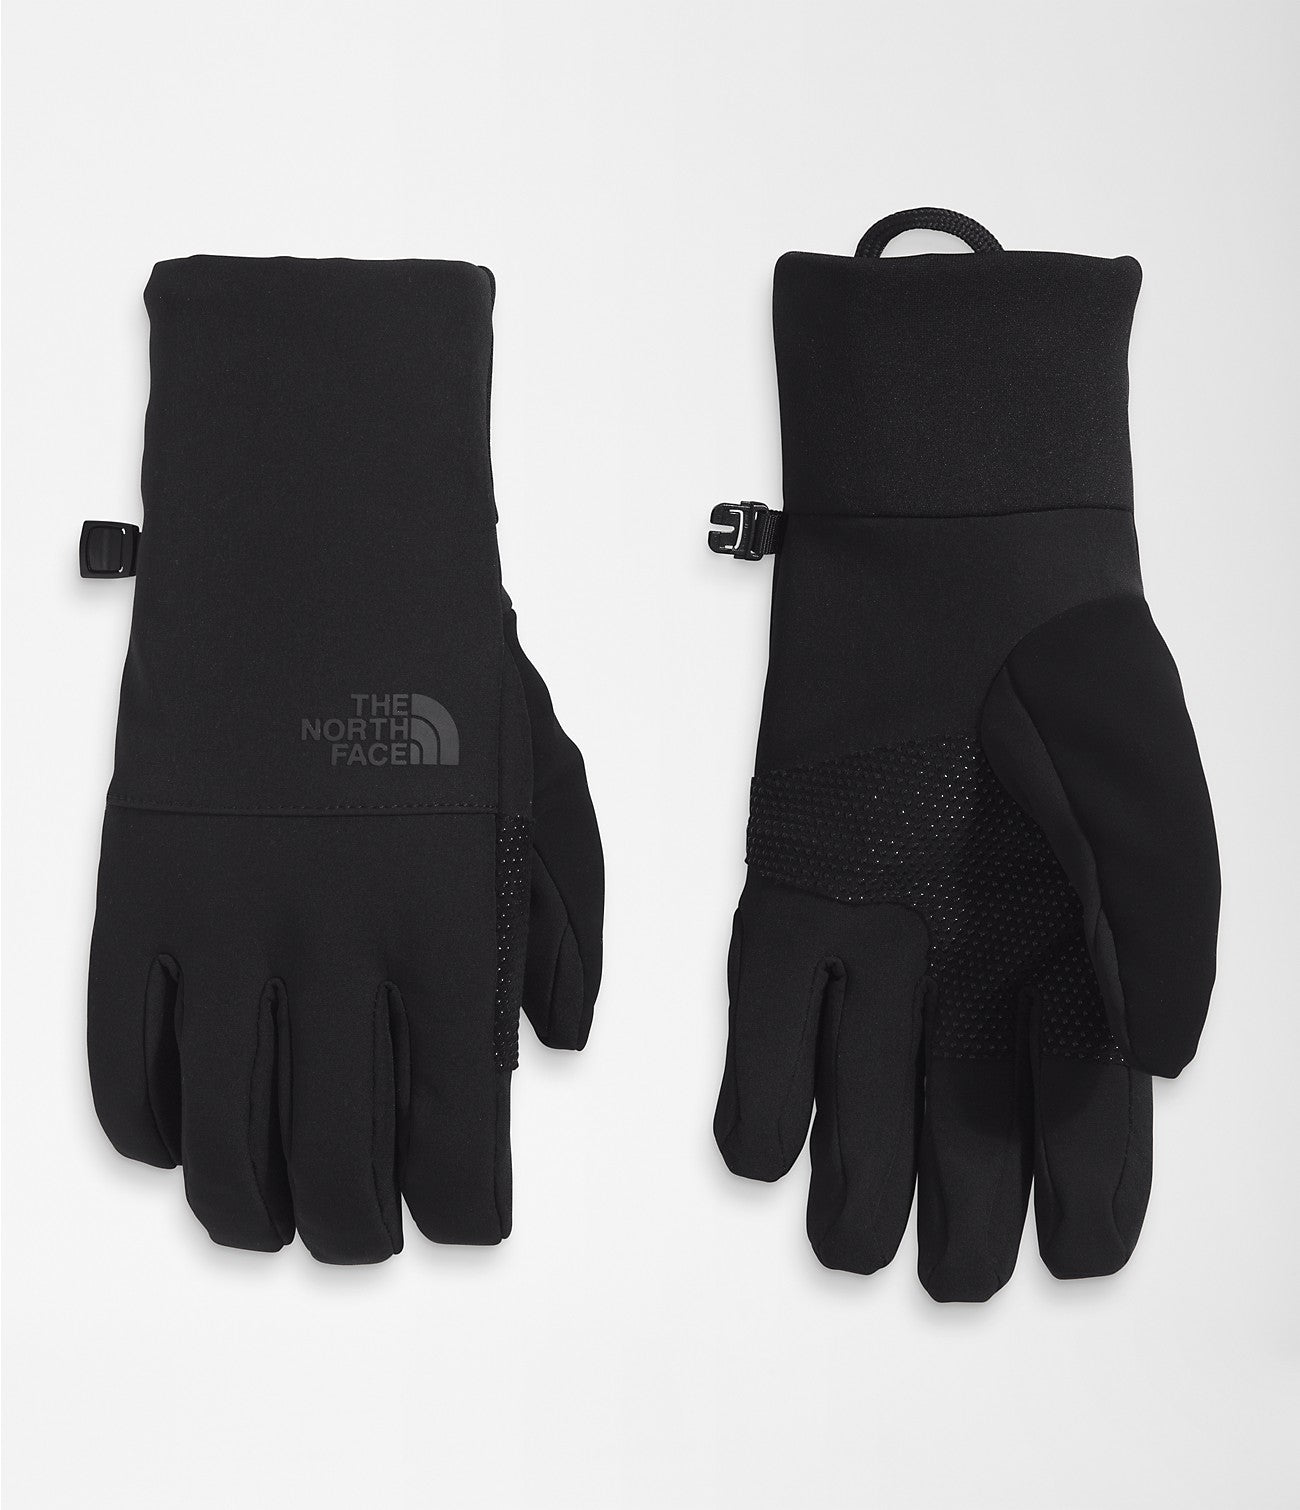 Womens Apex Insulated Etip Glove Village Ski Hut The North Face Accessories, Adult Gloves/Mitts, softgoods accessories